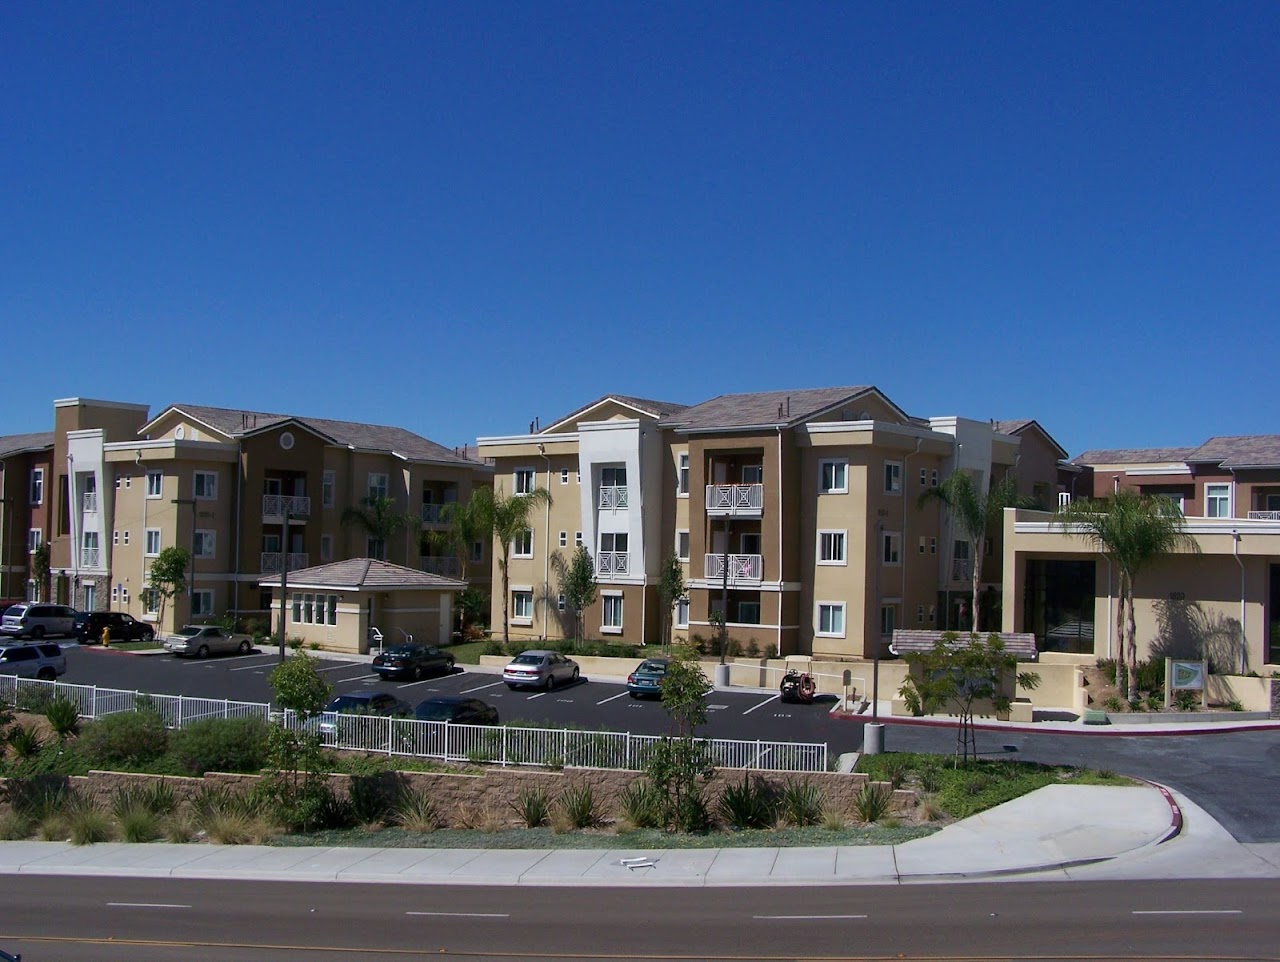 Photo of MELROSE VILLAS. Affordable housing located at 1820 MELROSE DR SAN MARCOS, CA 92078